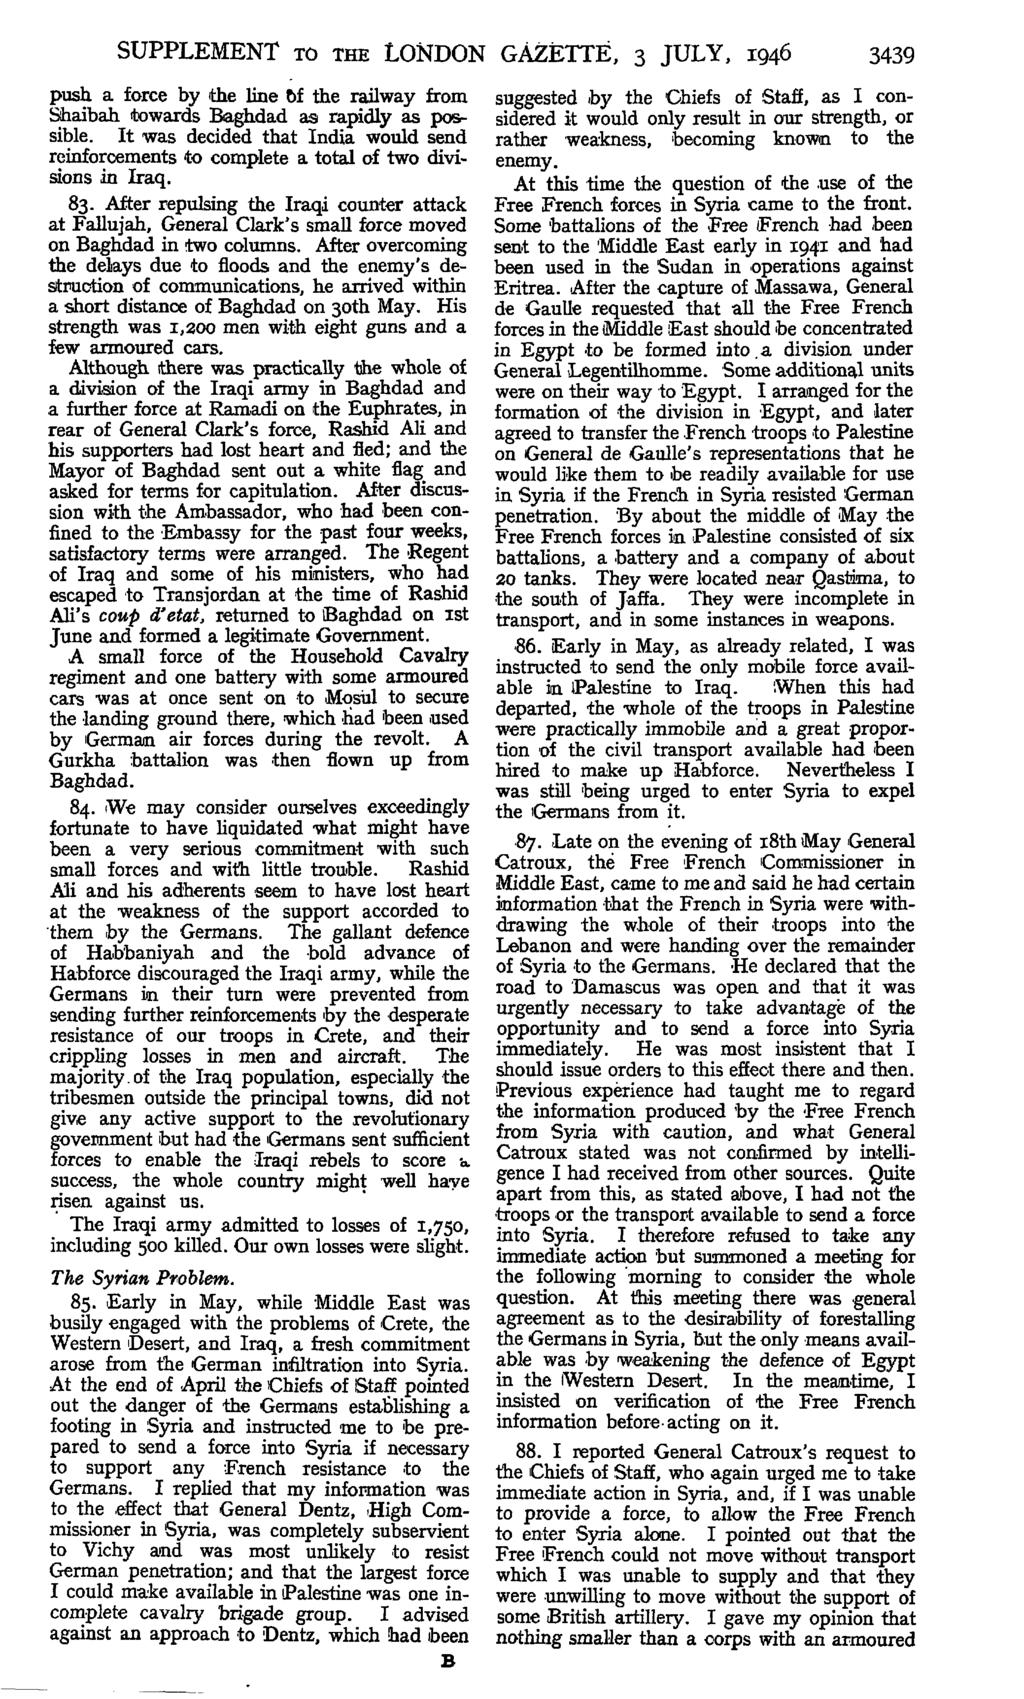 SUPPLEMENT TO THE LONDON GAZETTE, 3 JULY, 1946 3439 push a force by the line of the railway from Shaibah towards Baghdad as rapidly as possible.